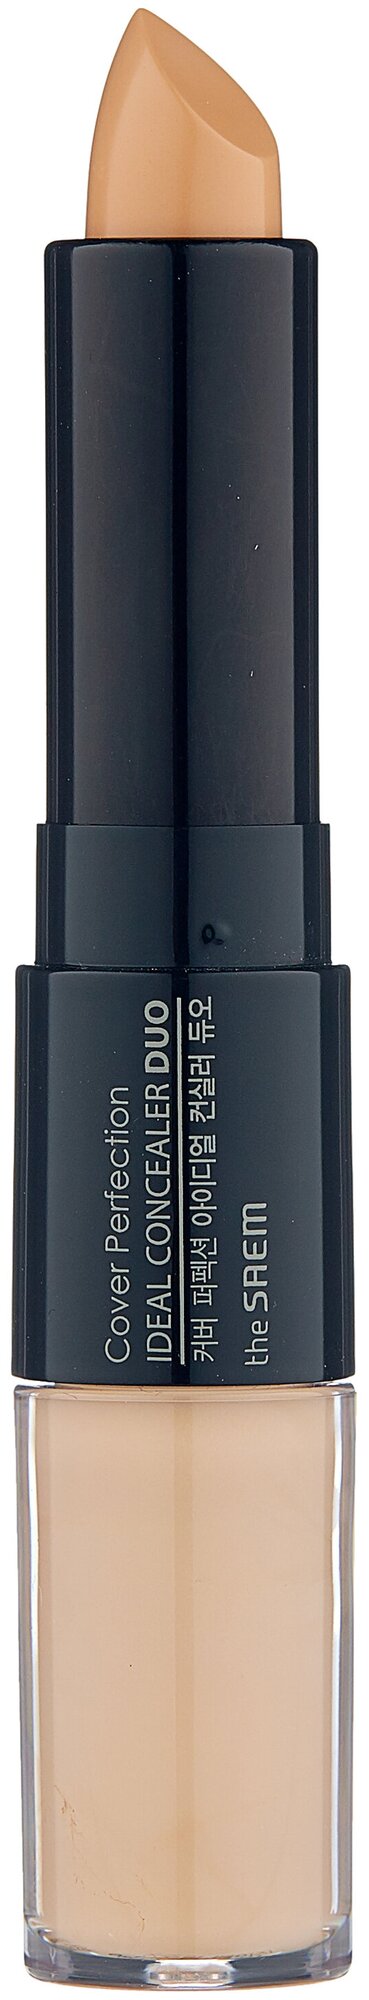 The Saem Консилер Cover Perfection Ideal Concealer Duo, оттенок 1.5 Natural Beige, , 1